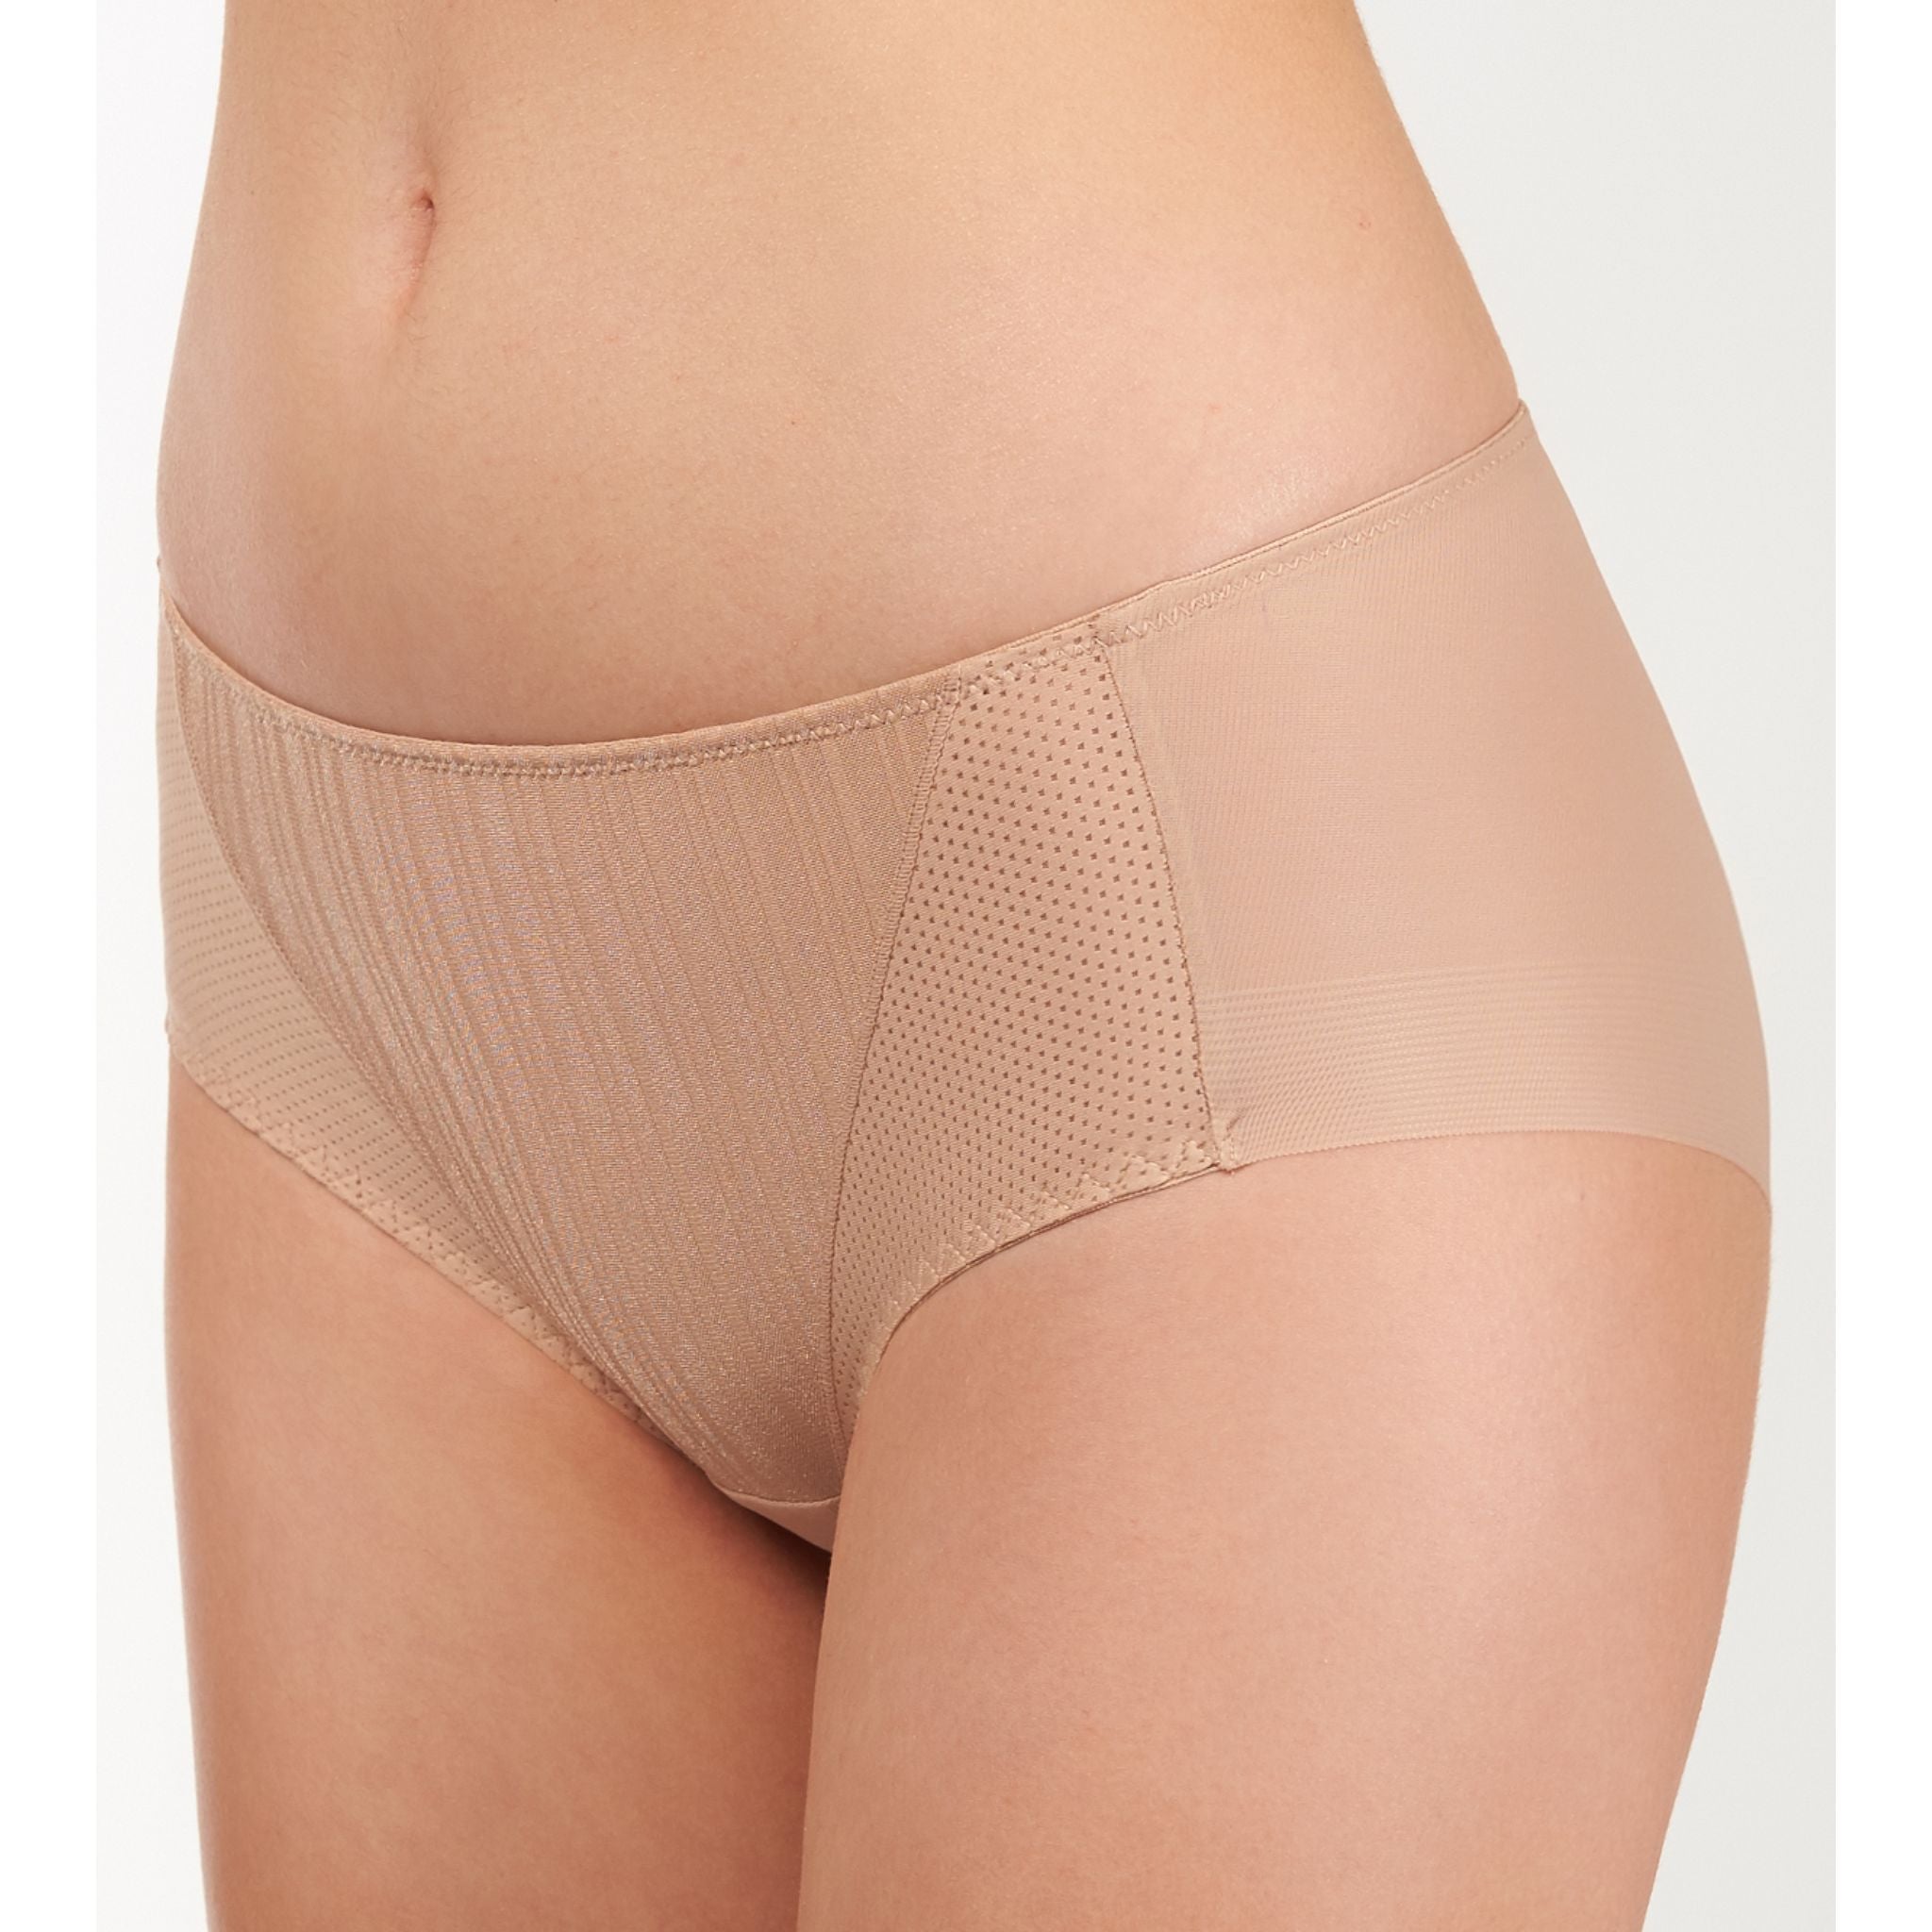 Triumph Pure Invisible Panties - Hipster - Smooth Skin